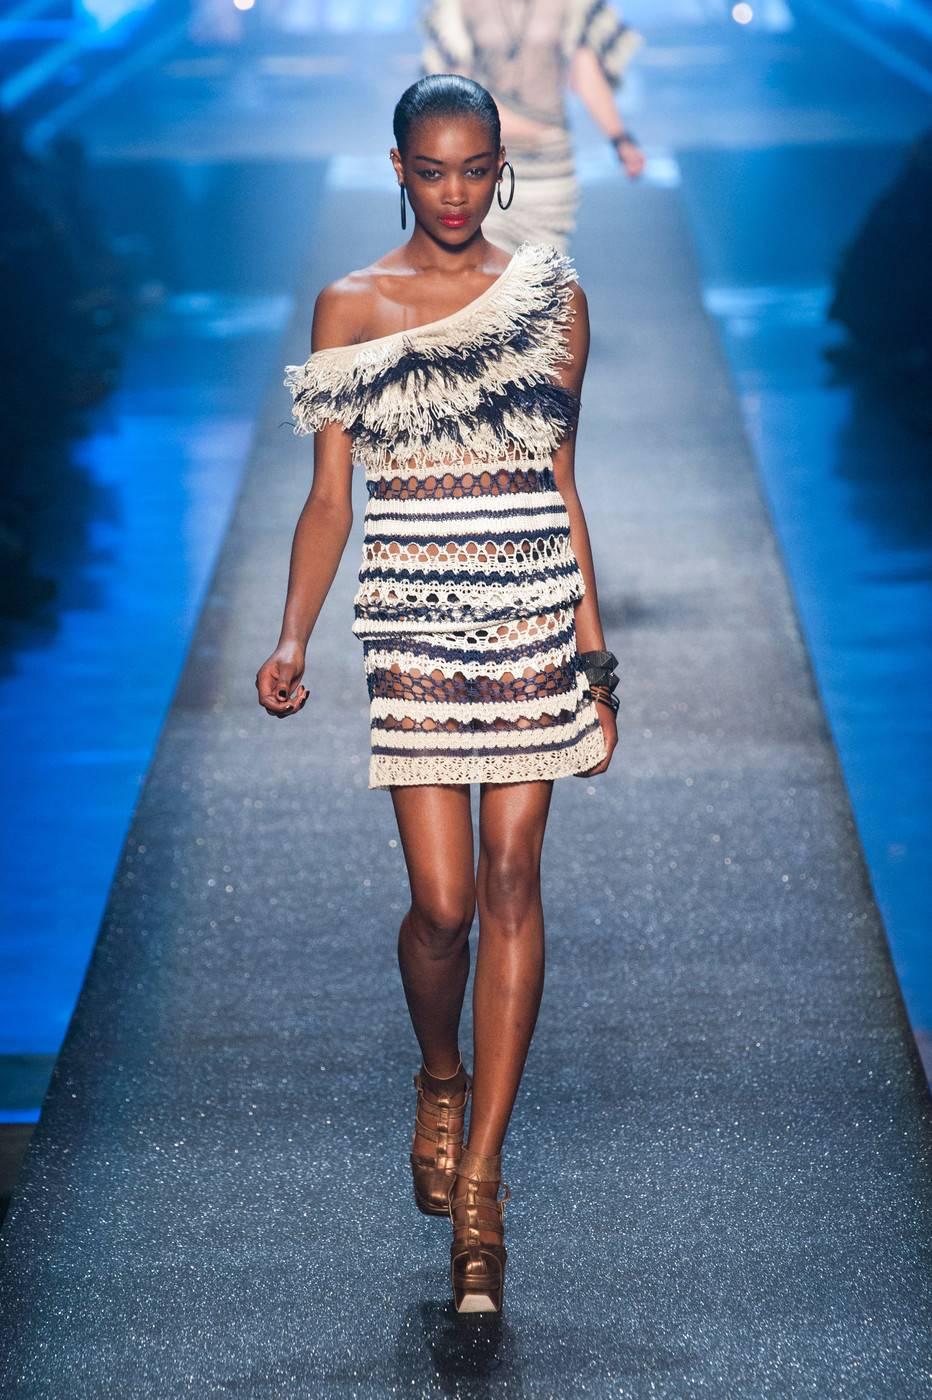 2013 Jean Paul Gaultier off shoulder blue and creme raffia knit crochet dress.
(see runway picture). Perfect for beach vacation outfit.
fit size : 6/8 medium
Bust: 36